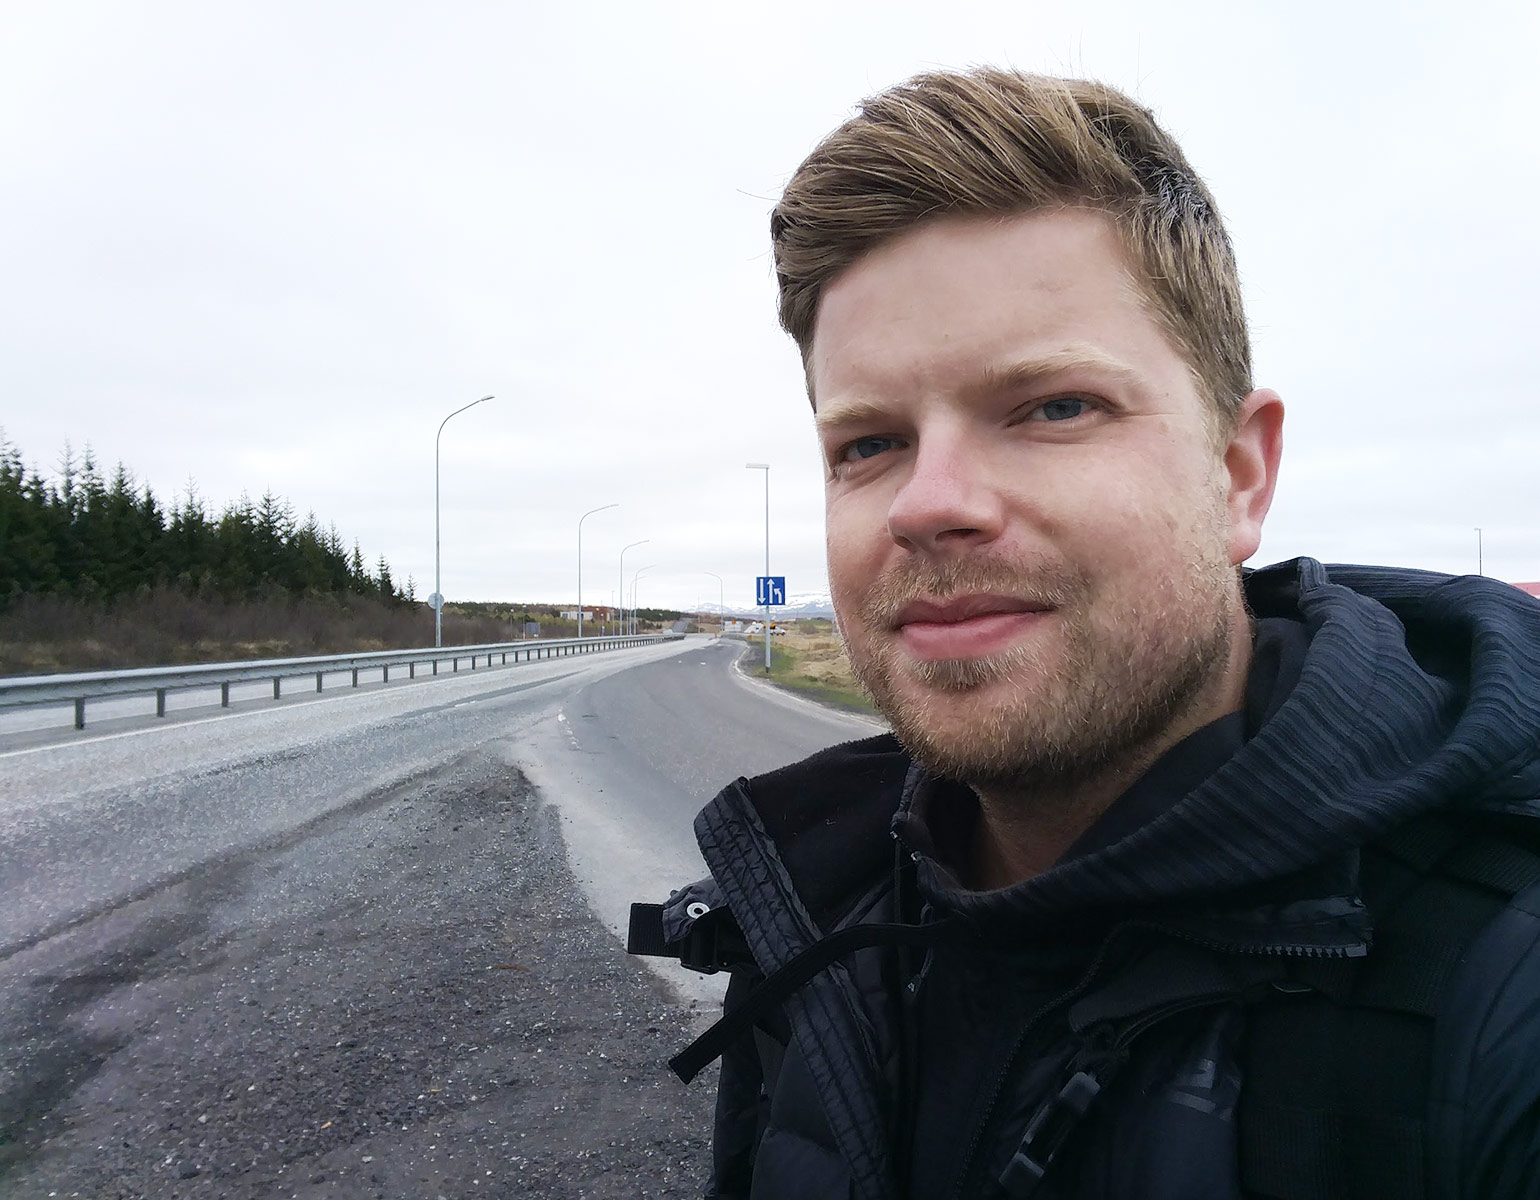 Hitchhiking in Iceland